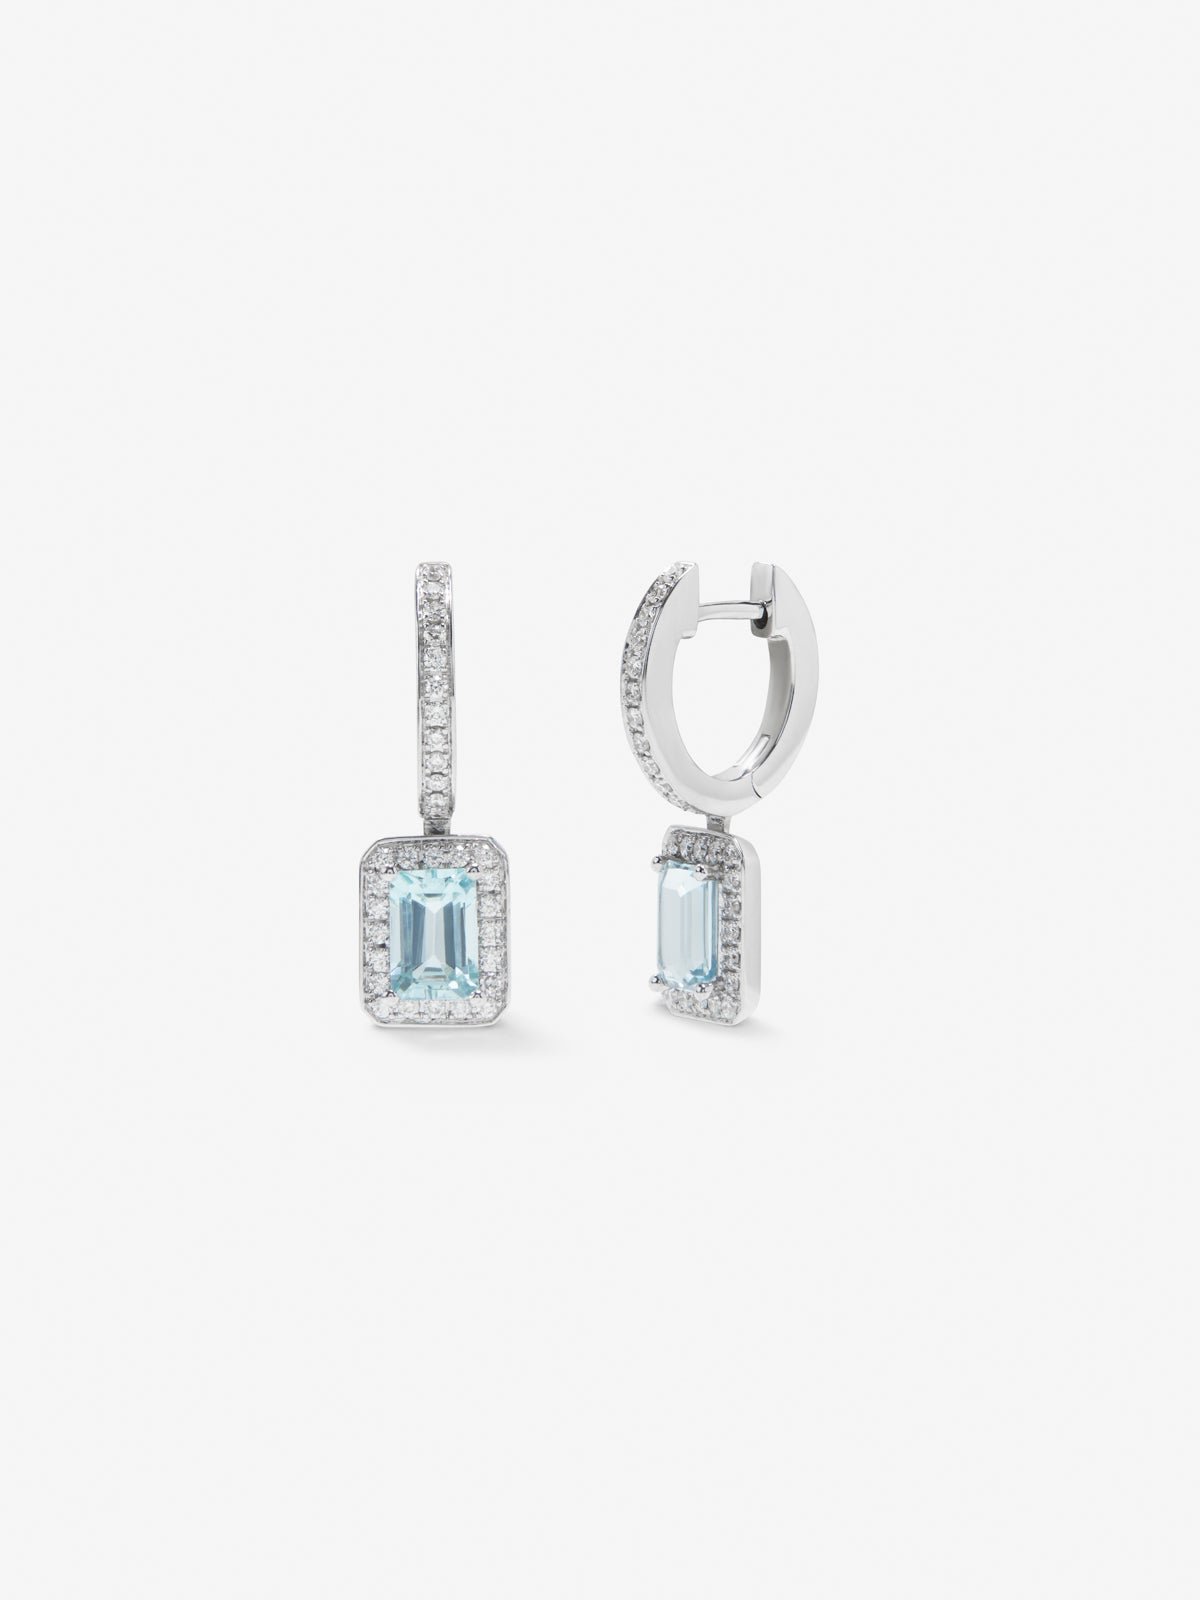 Hoop earrings with 18K white gold pendant featuring aquamarine and diamond